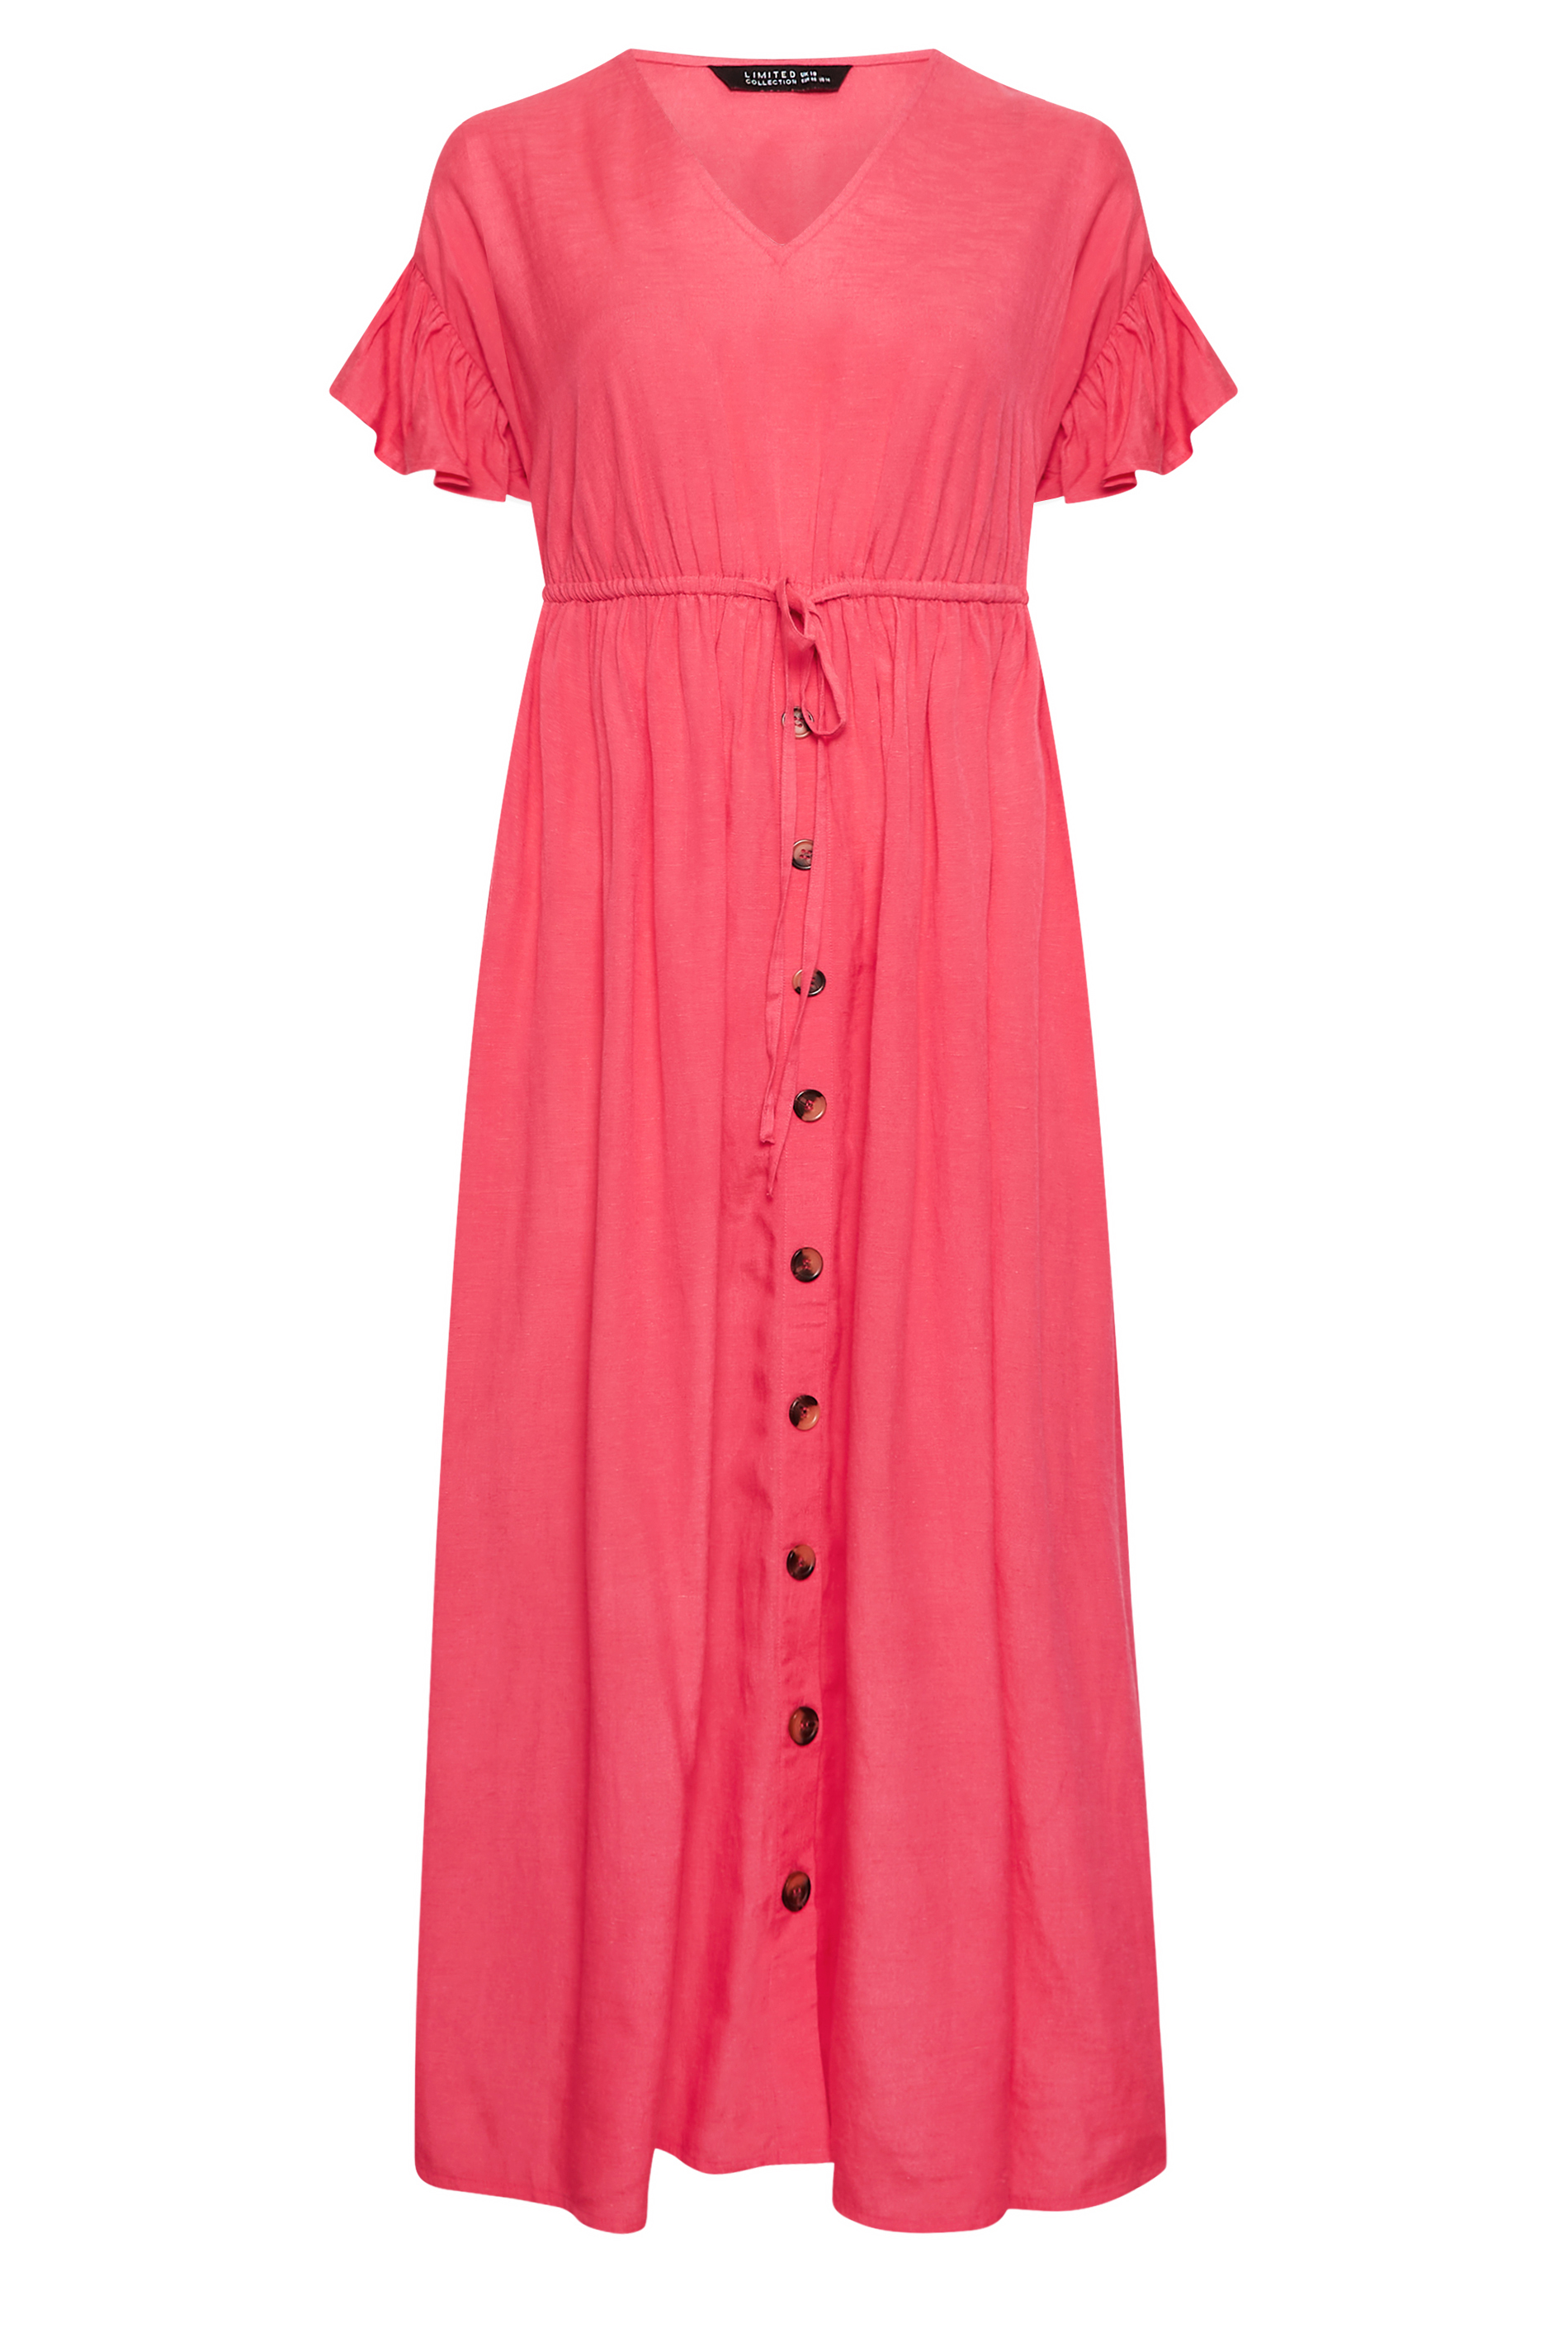 LIMITED COLLECTION Plus Size Coral Pink Frill Sleeve Cotton Maxi Dress ...